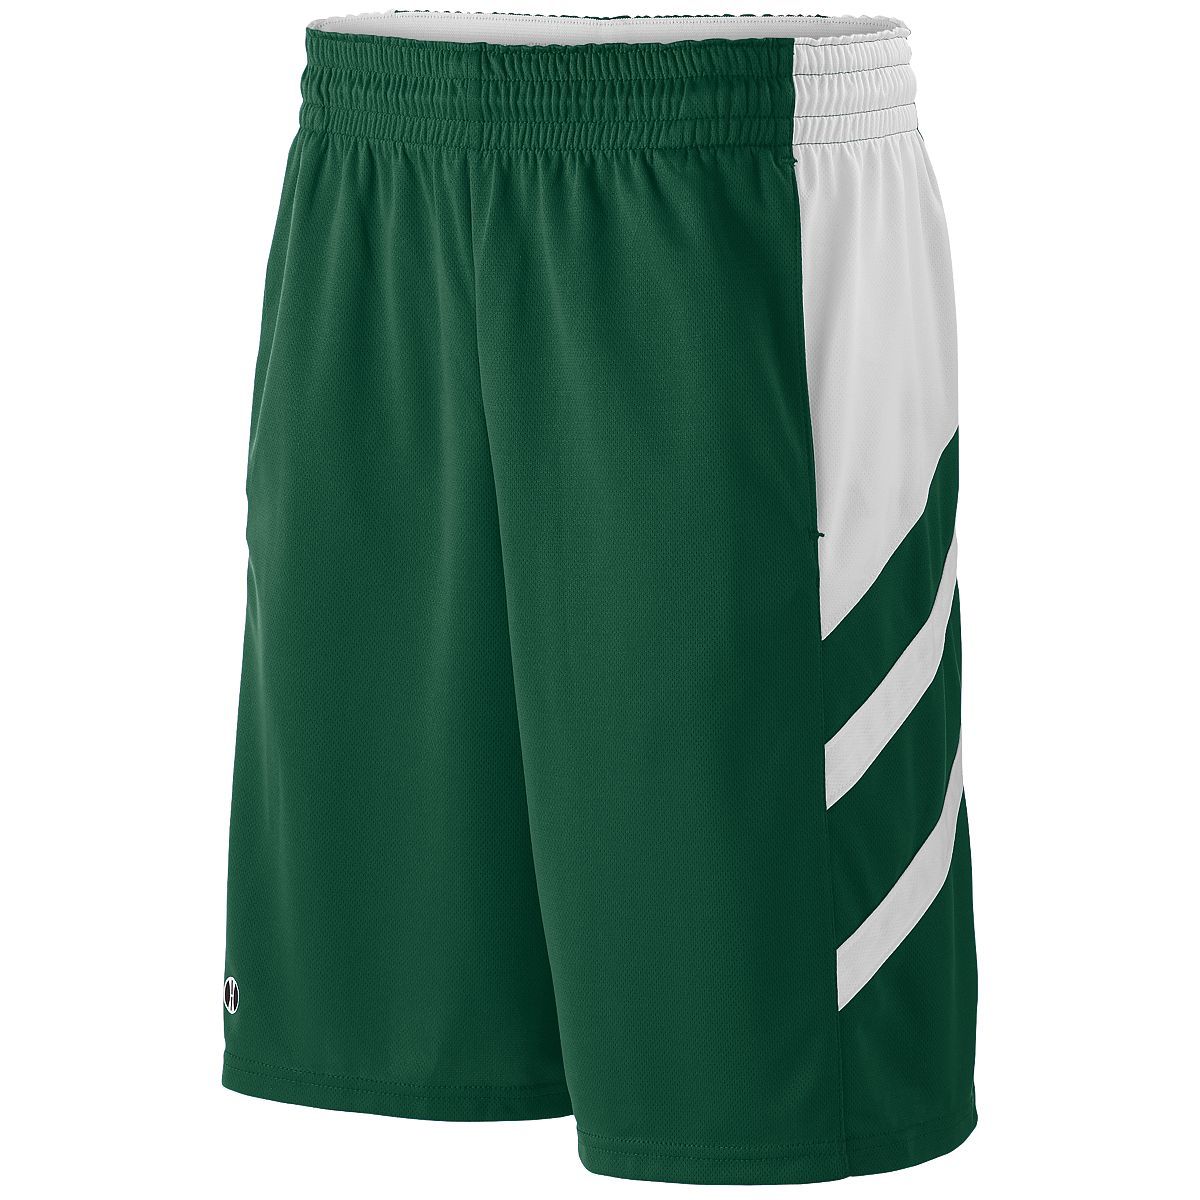 Holloway Helium Shorts in Forest/White  -Part of the Adult, Adult-Shorts, Holloway product lines at KanaleyCreations.com